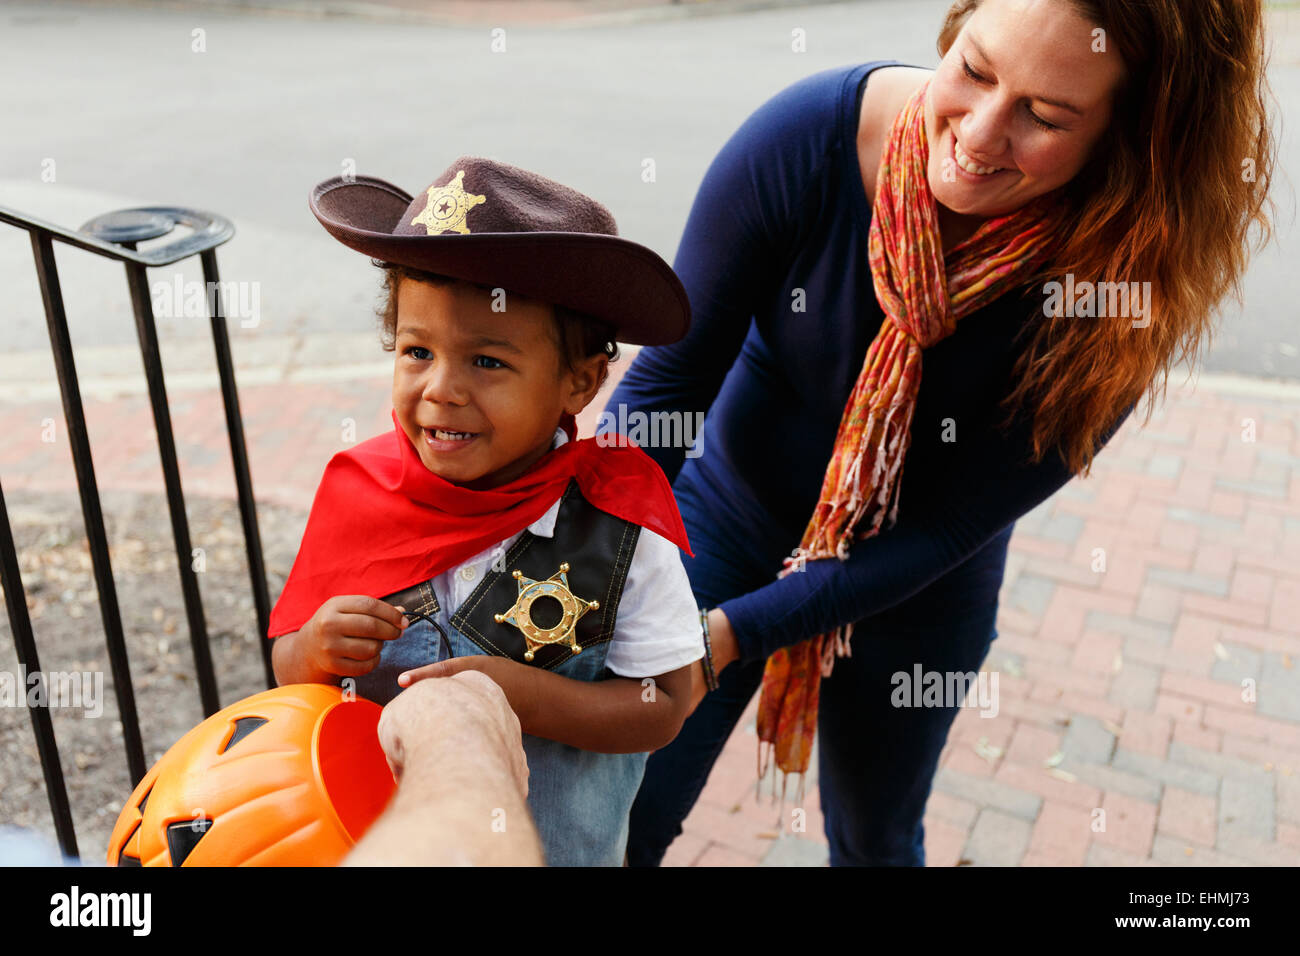 Mother with son trick dressed as cowboy for Halloween Stock Photo